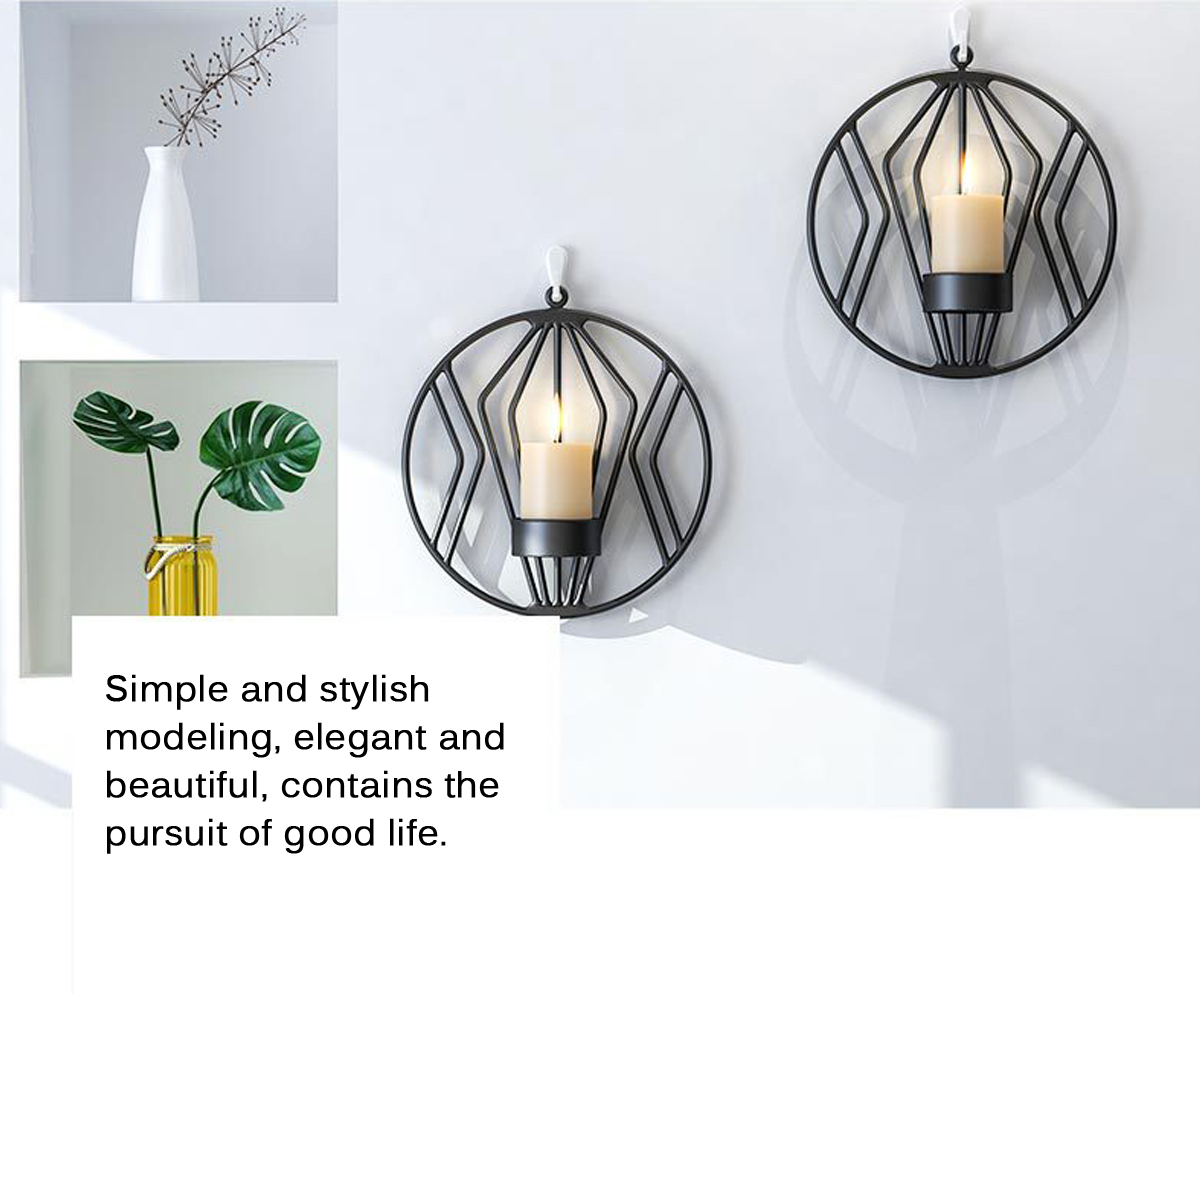 3D-Geometric-Candlestick-Iron-Wall-Candle-Holder-Sconce-Warm-Home-Party-Decor-1727945-1